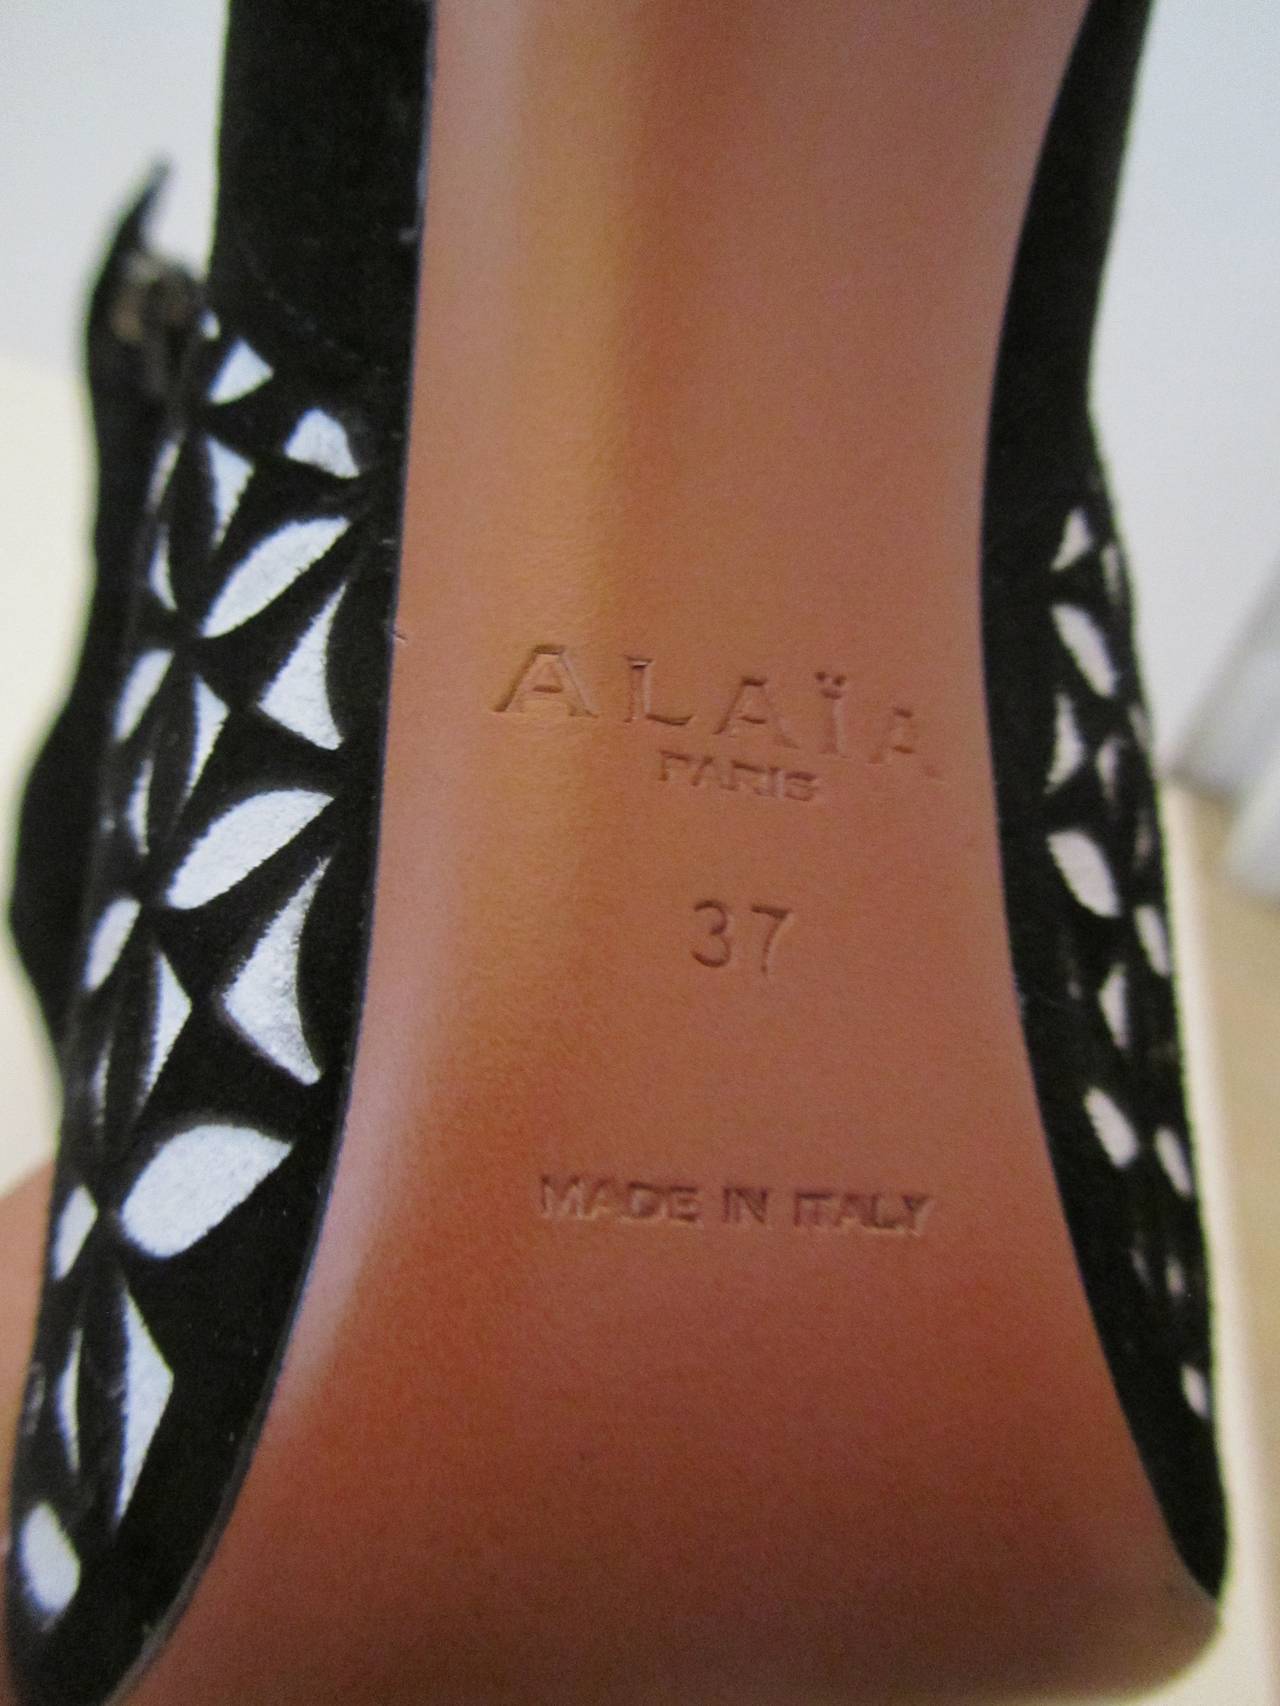 New Alaia Open Toed High Heel Boots - 37 - Black and White Suede For Sale 4